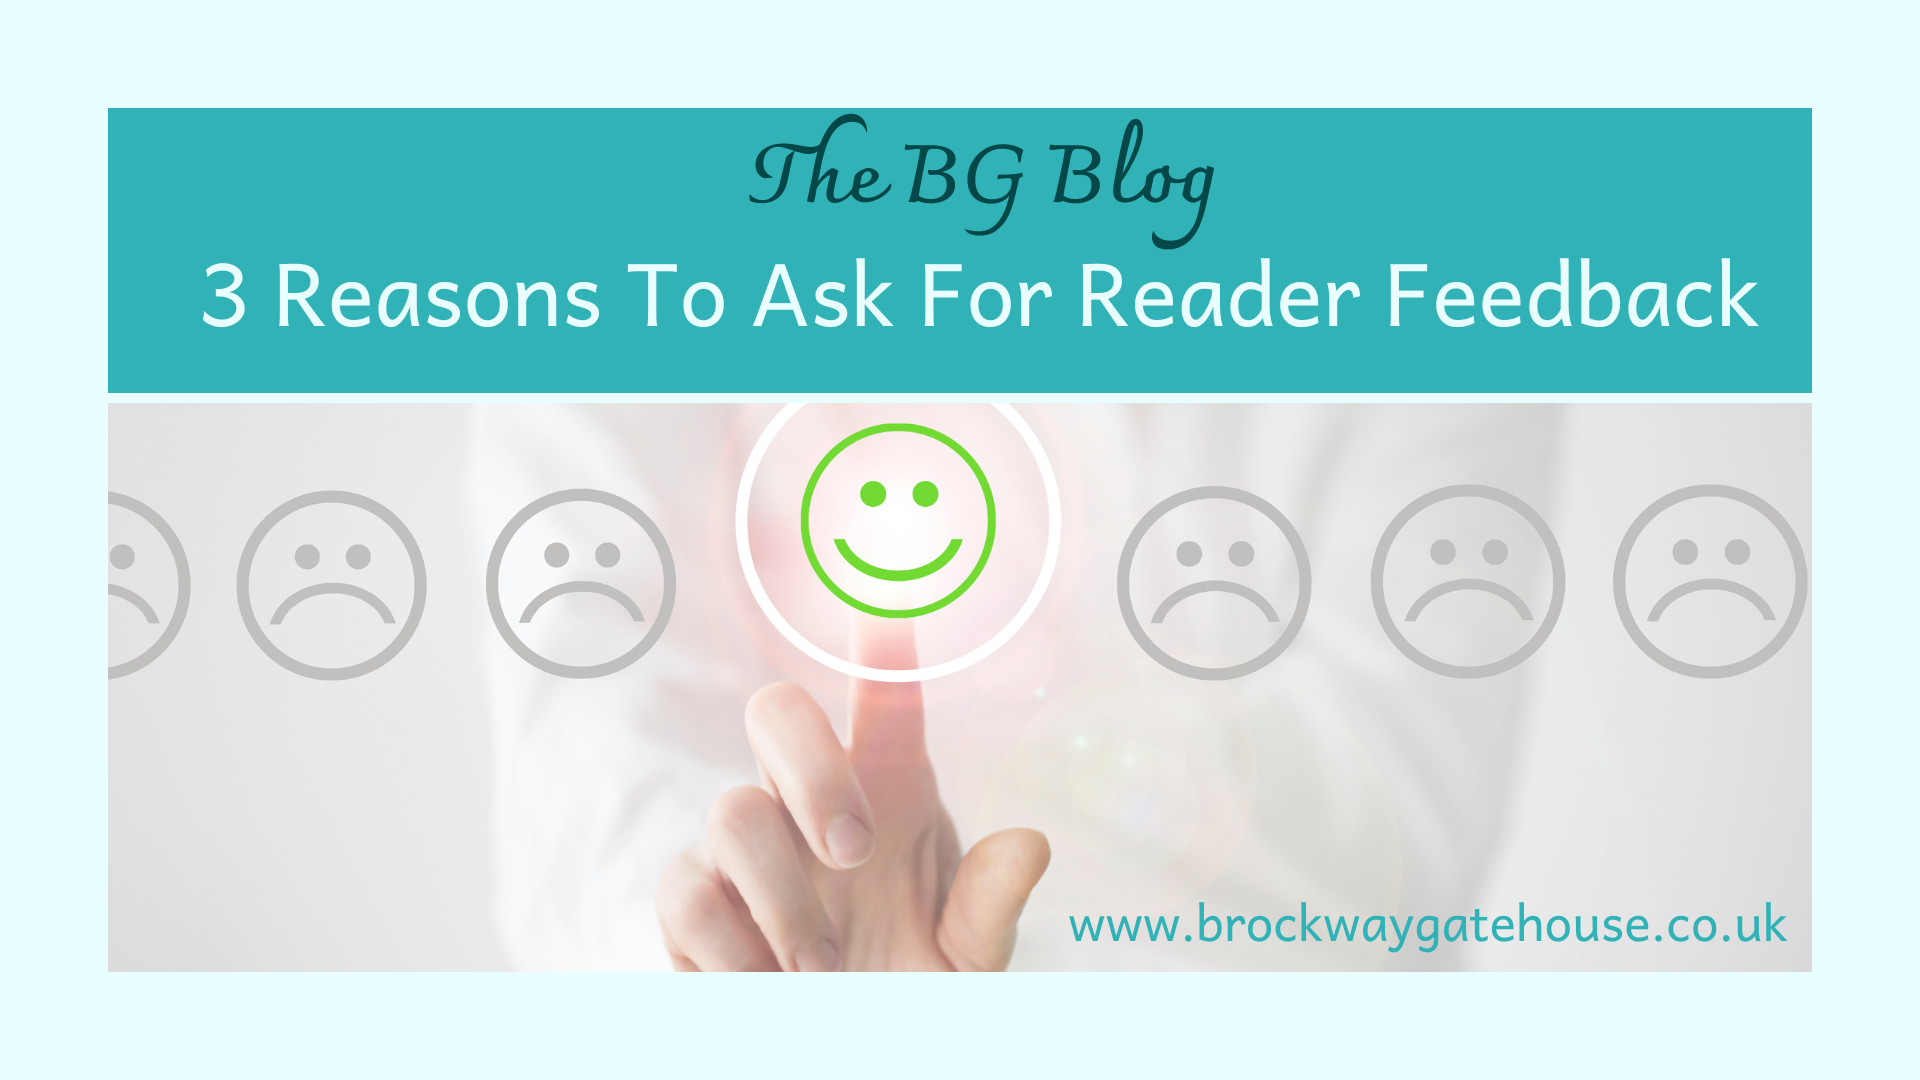 3 Reasons to ask for Reader Feedback